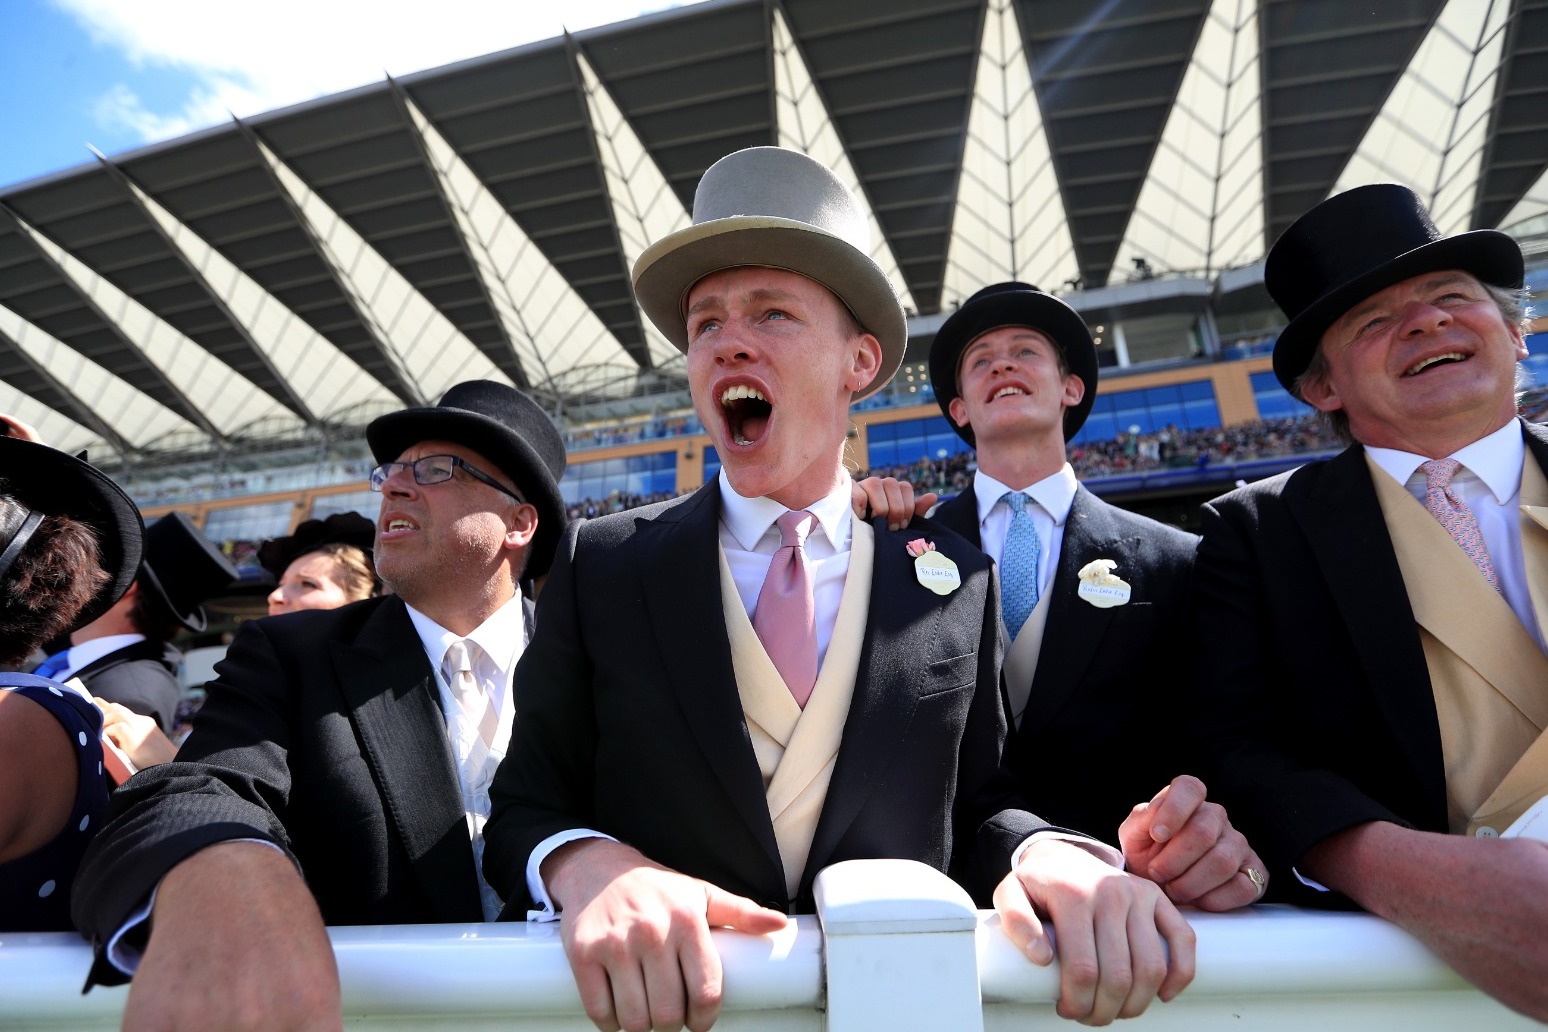 Racegoers return to Royal Ascot for the first time since pandemic began 